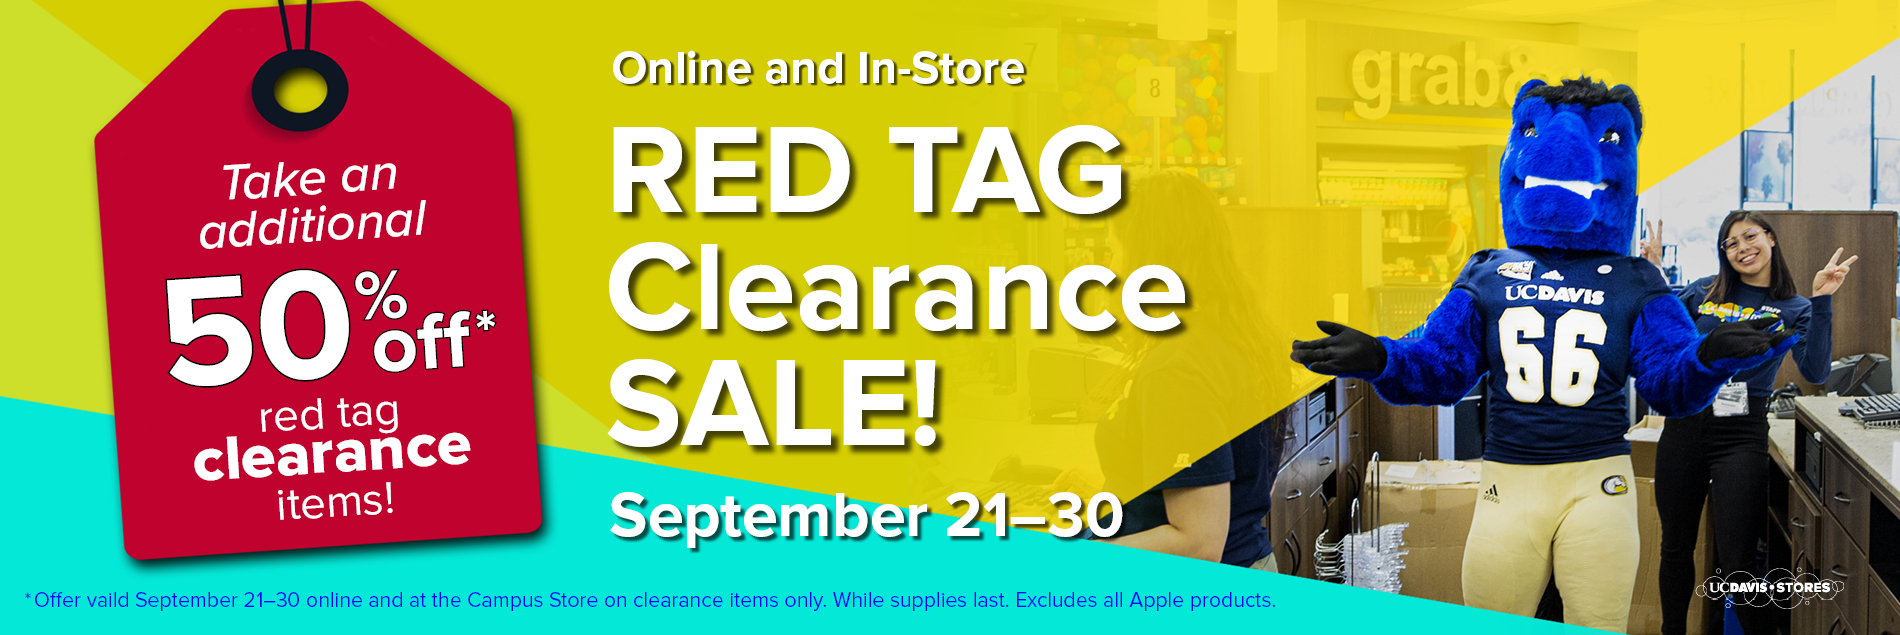 Red tag clearance sale from September 21 to September 30